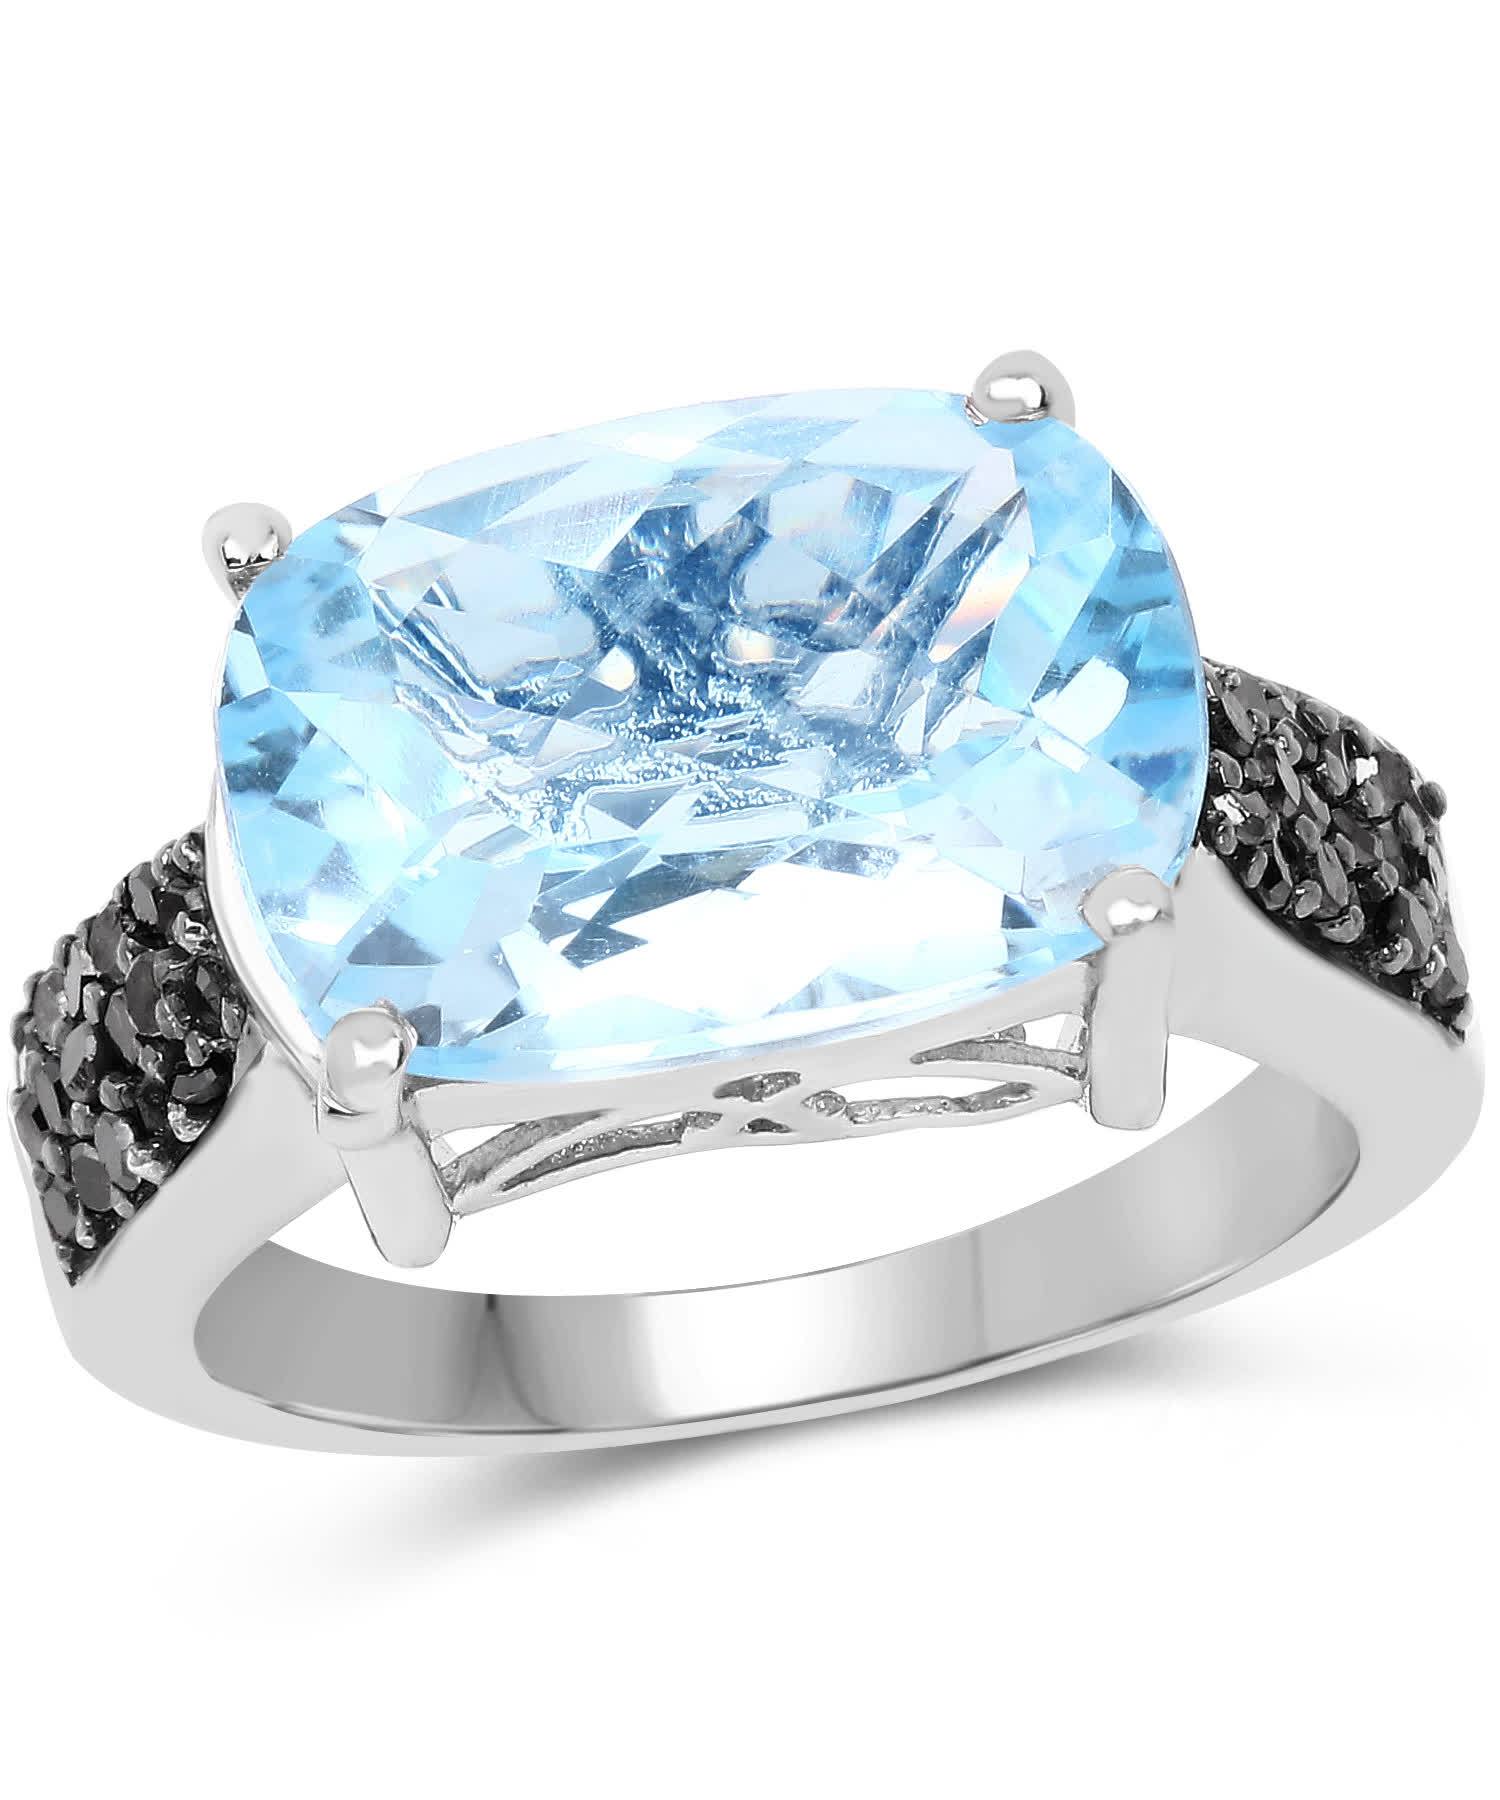 3.96ctw Natural Swiss Blue Topaz and Black Diamond Rhodium Plated 925 Sterling Silver Right Hand Ring View 1